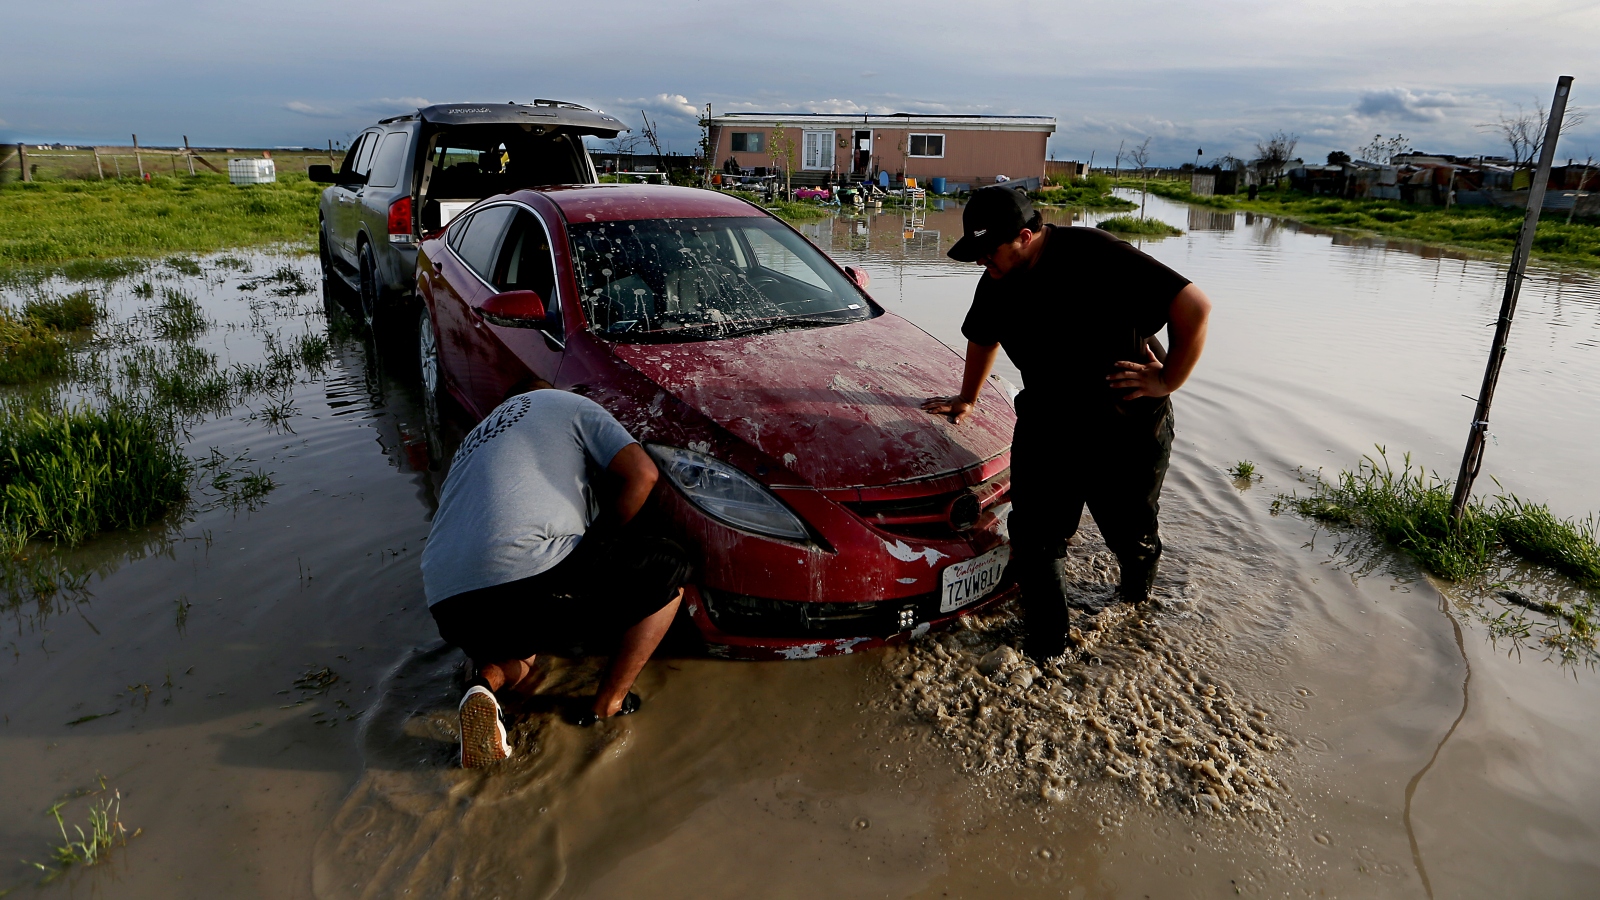 Jairo Estrada, left, and Juan Espinoza work to get one of their family's car off their flooded property in Allensworth, California. Portions of the town have flooded as Tulare Lake reappears.